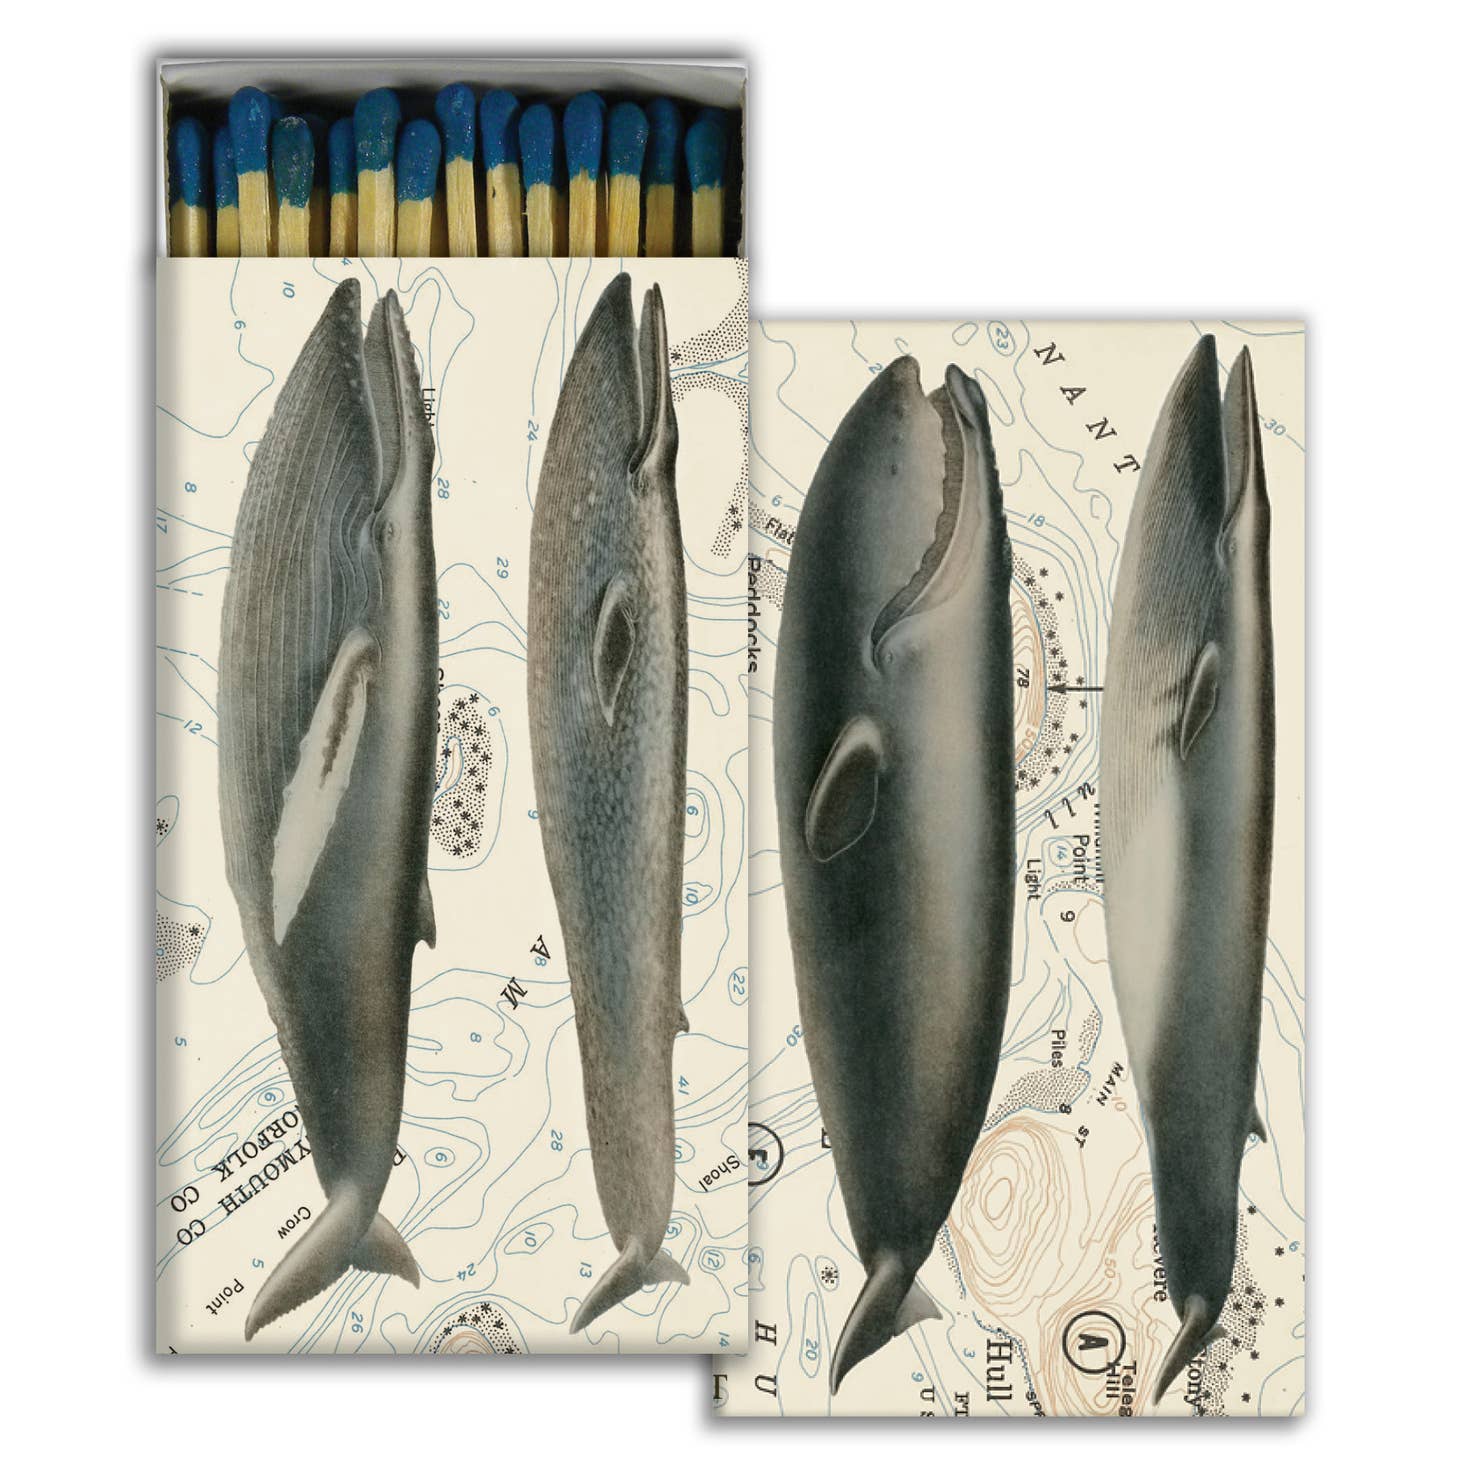 Whales Matches - Matches